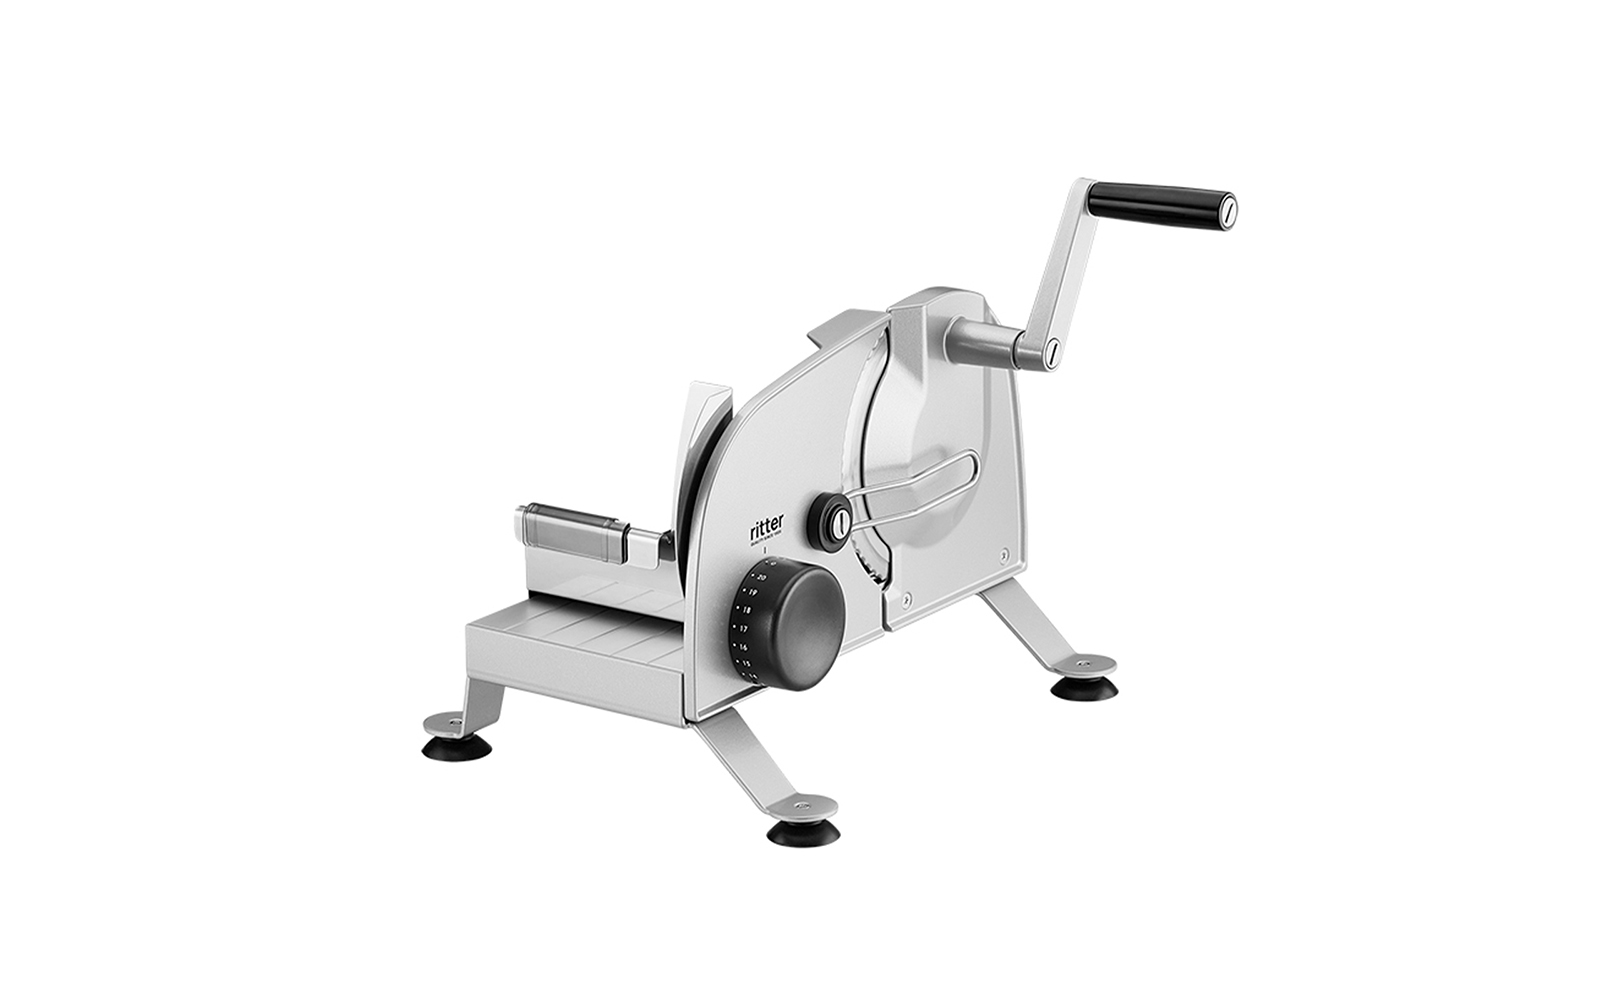 Paladin - 1A-FS404, Commercial 10'' Heavy Duty Manual Feed Meat Slicer